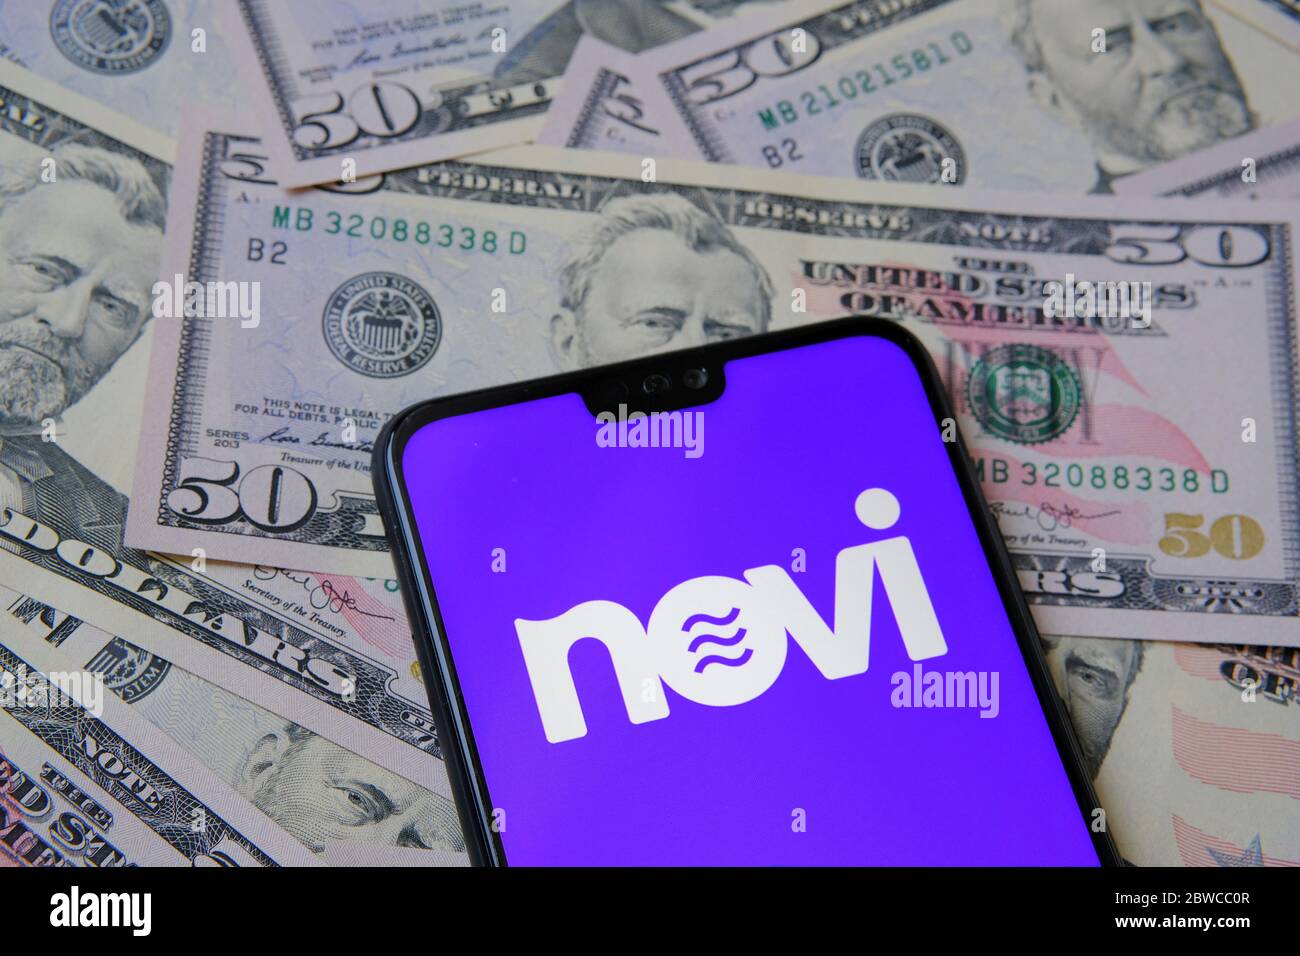 Stone /United Kingdom - May 28 2020: Novi logo on the smartphone placed on dollar banknotes. Novi is a new name for Facebook Calibra digital wallet us Stock Photo